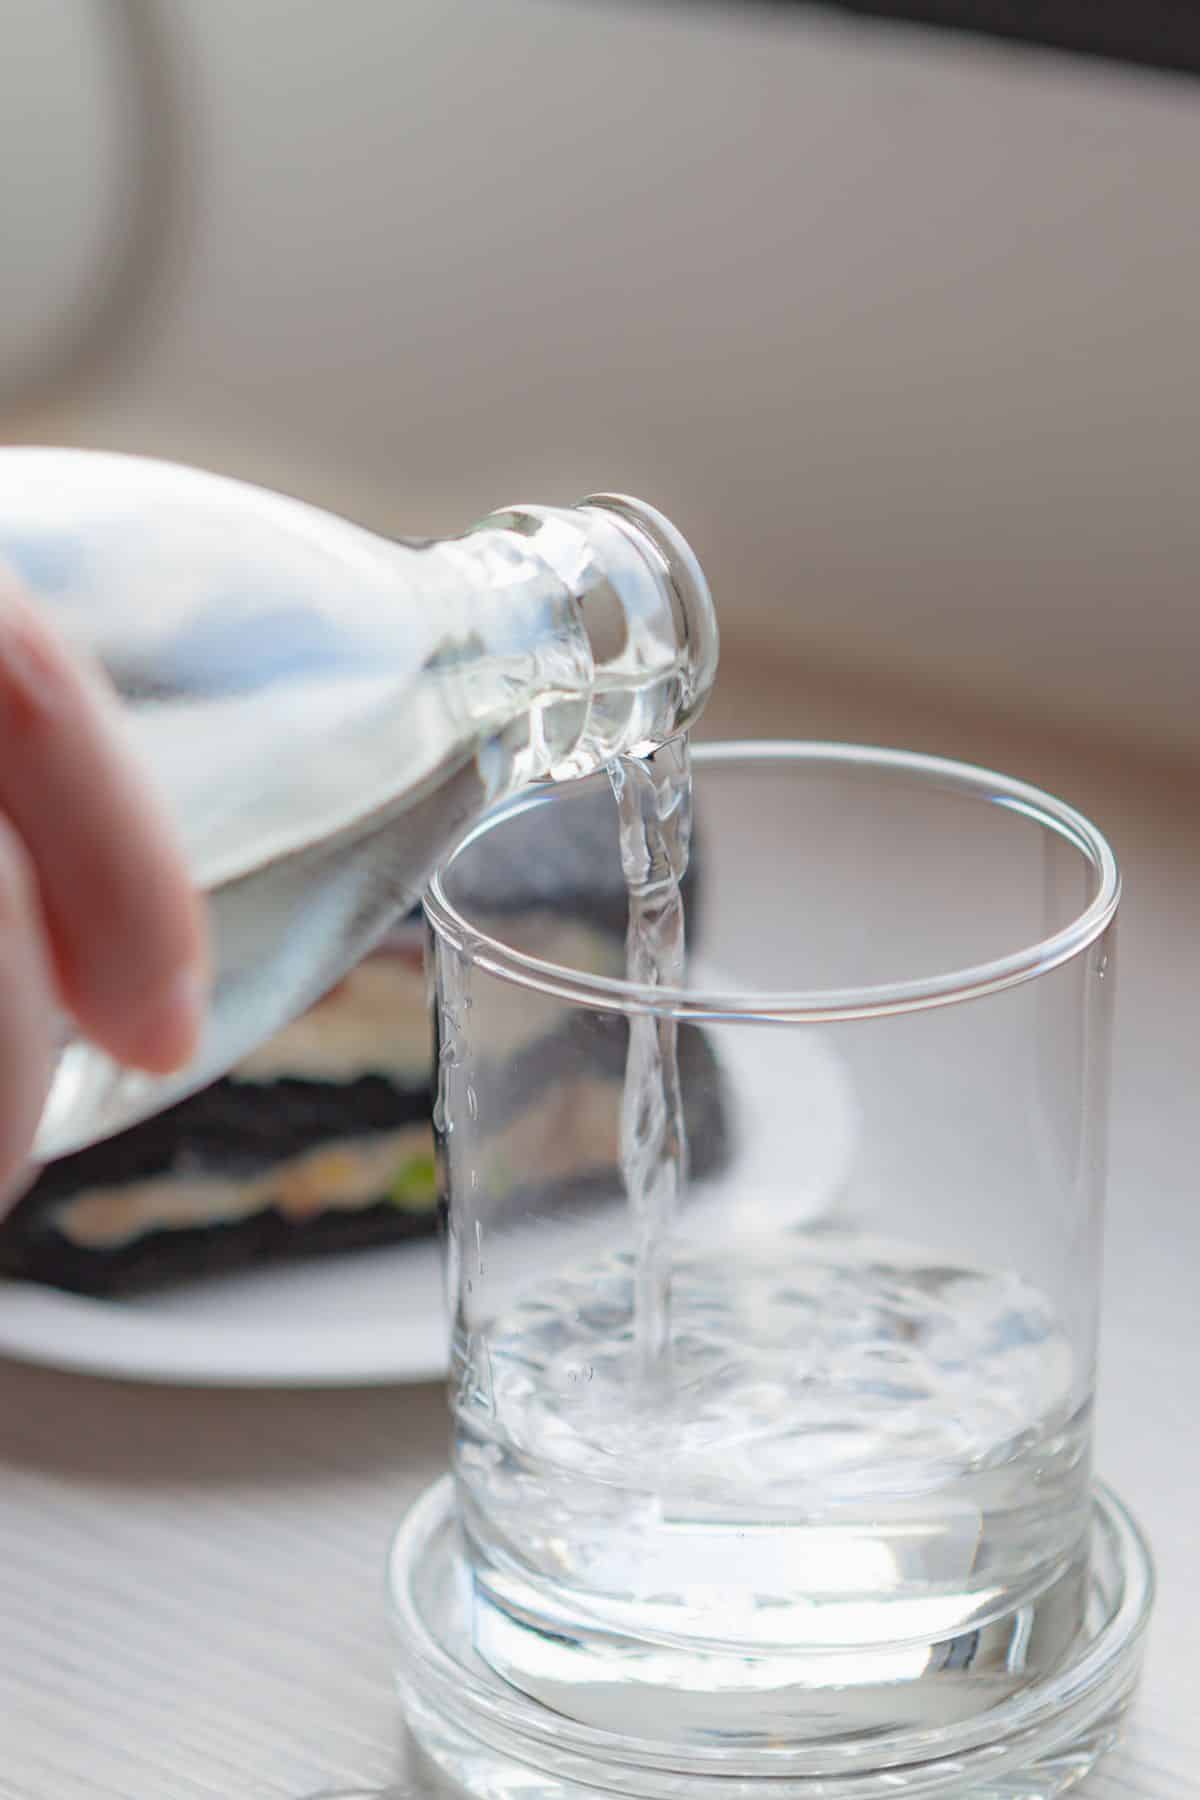 a person pouring water into a glass.